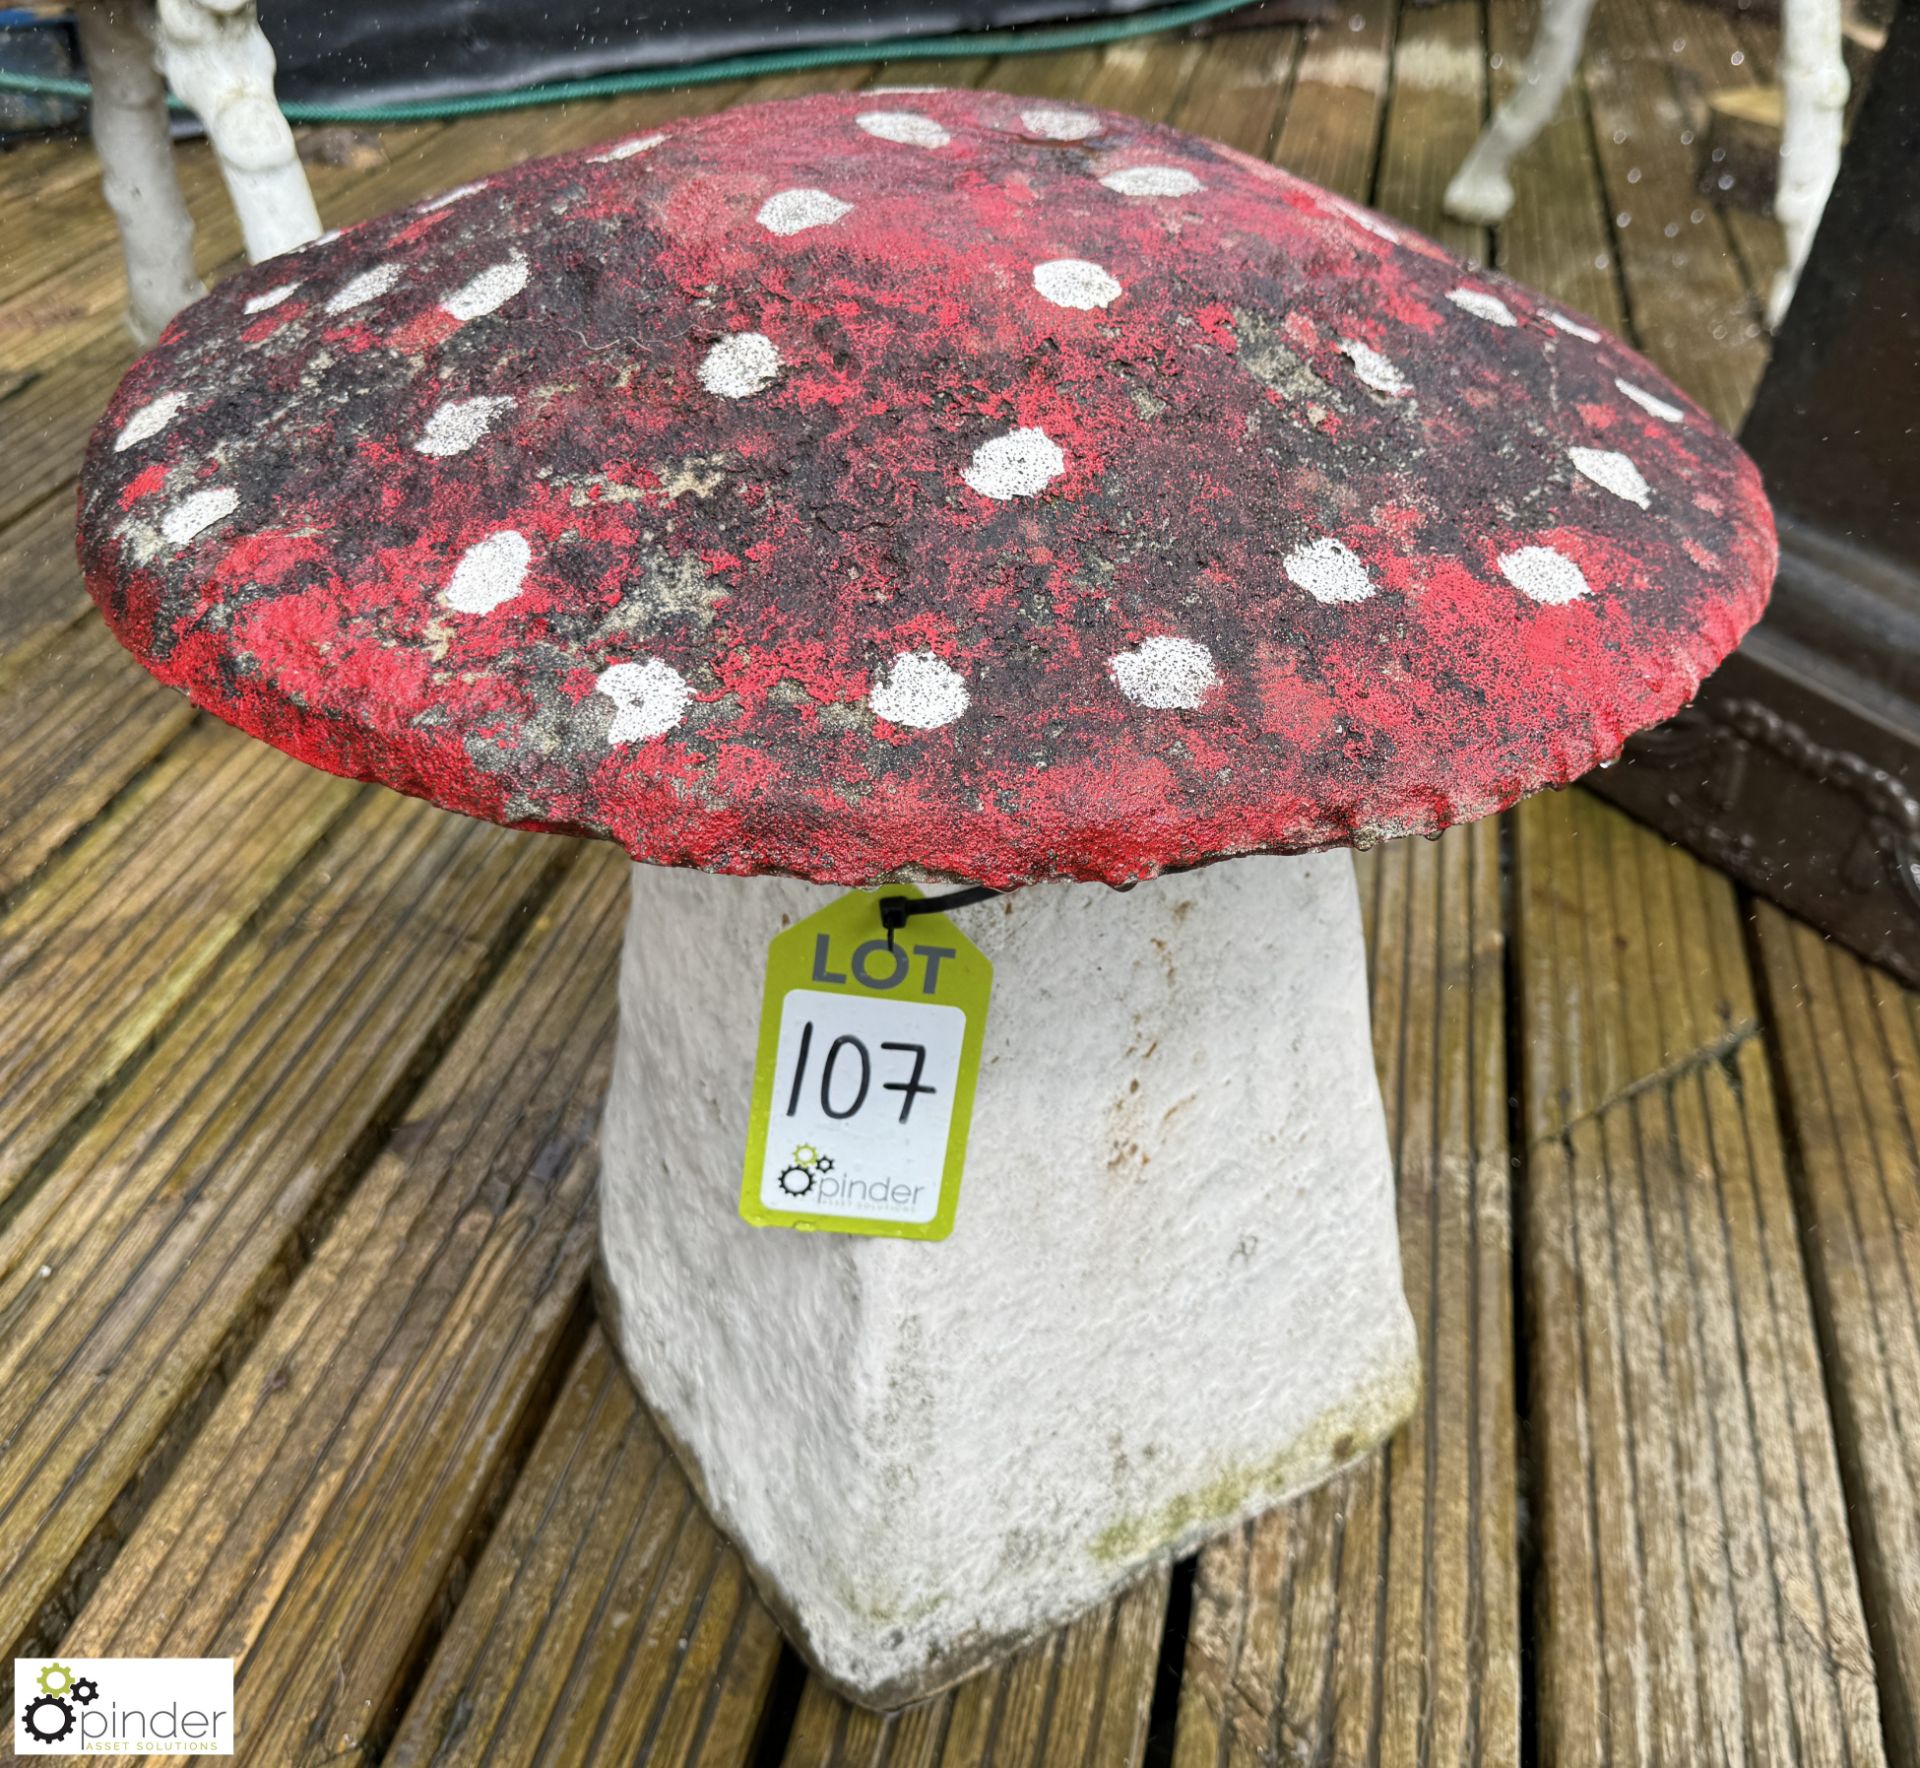 A reconstituted stone Staddle Stone painted like a traditional toadstool Amanita Muscaria, approx. - Image 2 of 5